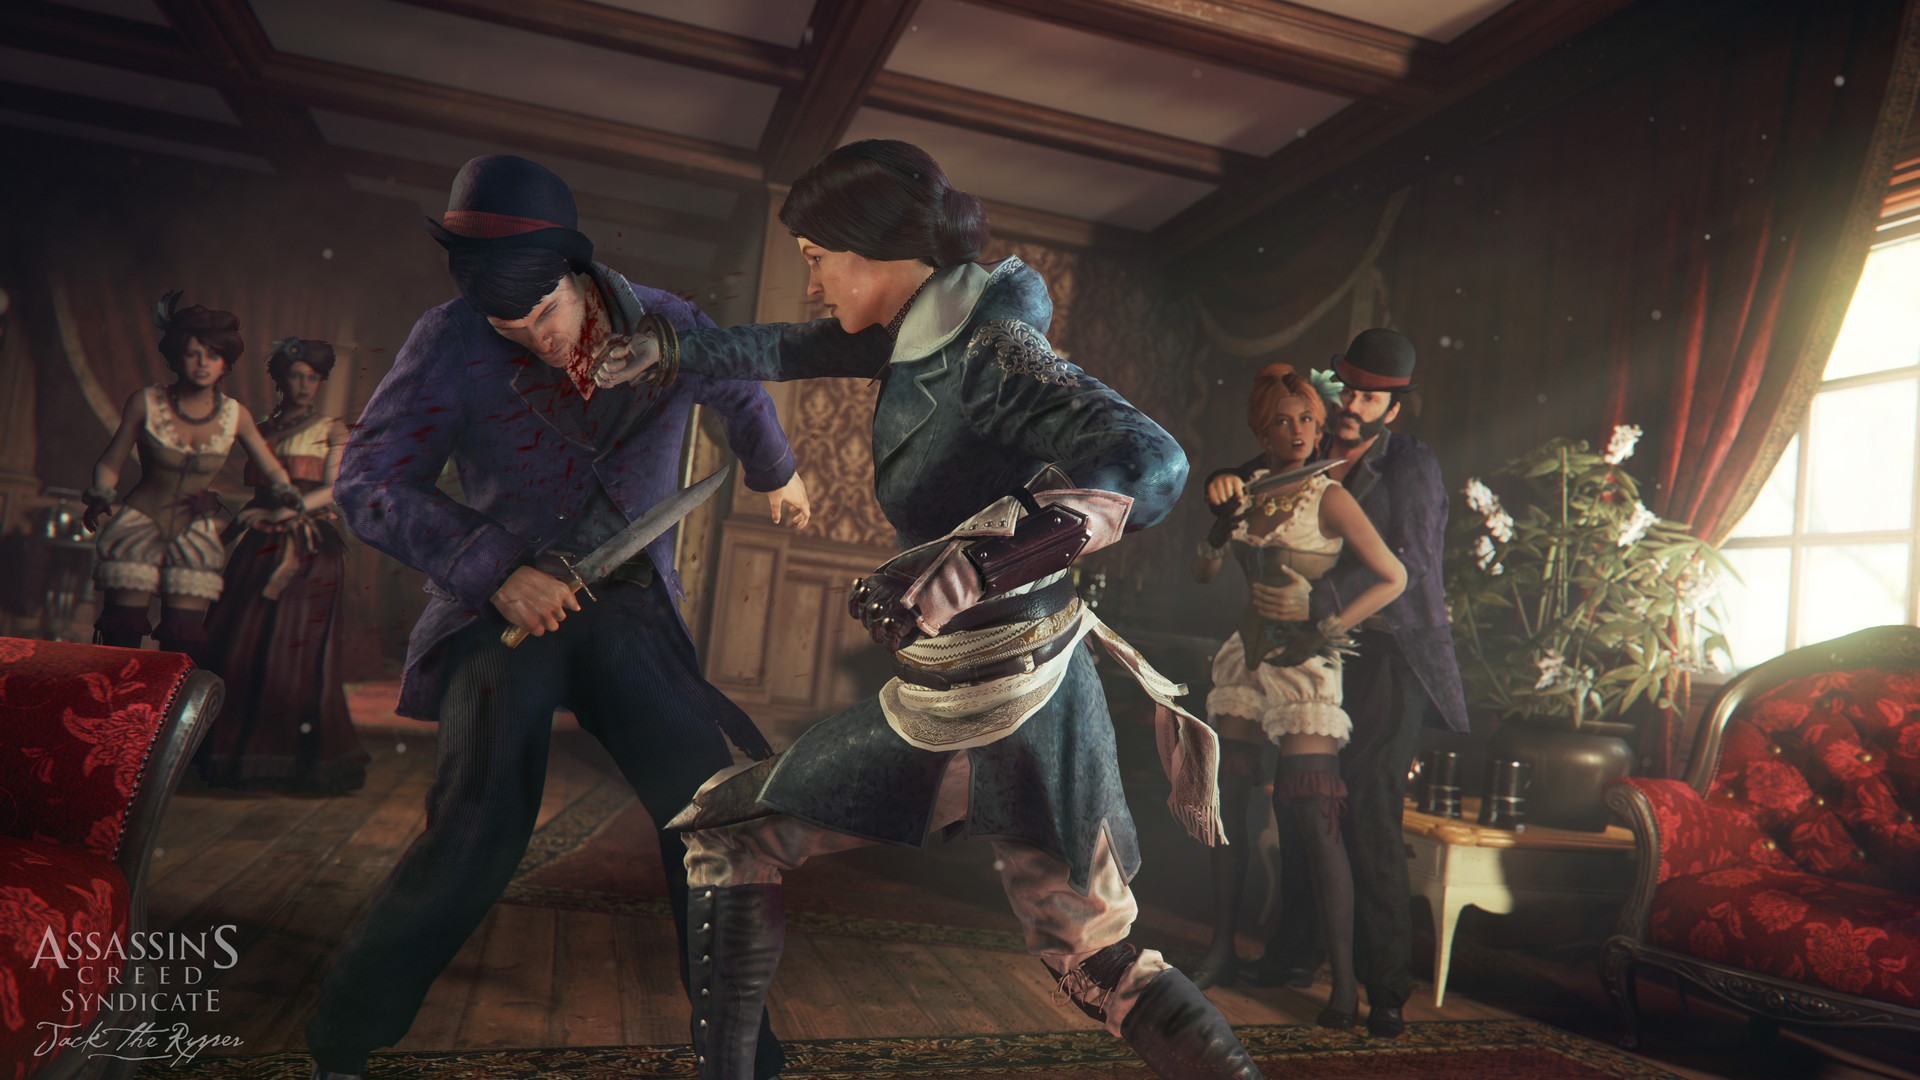 Assassin's Creed: Syndicate - Jack the Ripper - screenshot 7